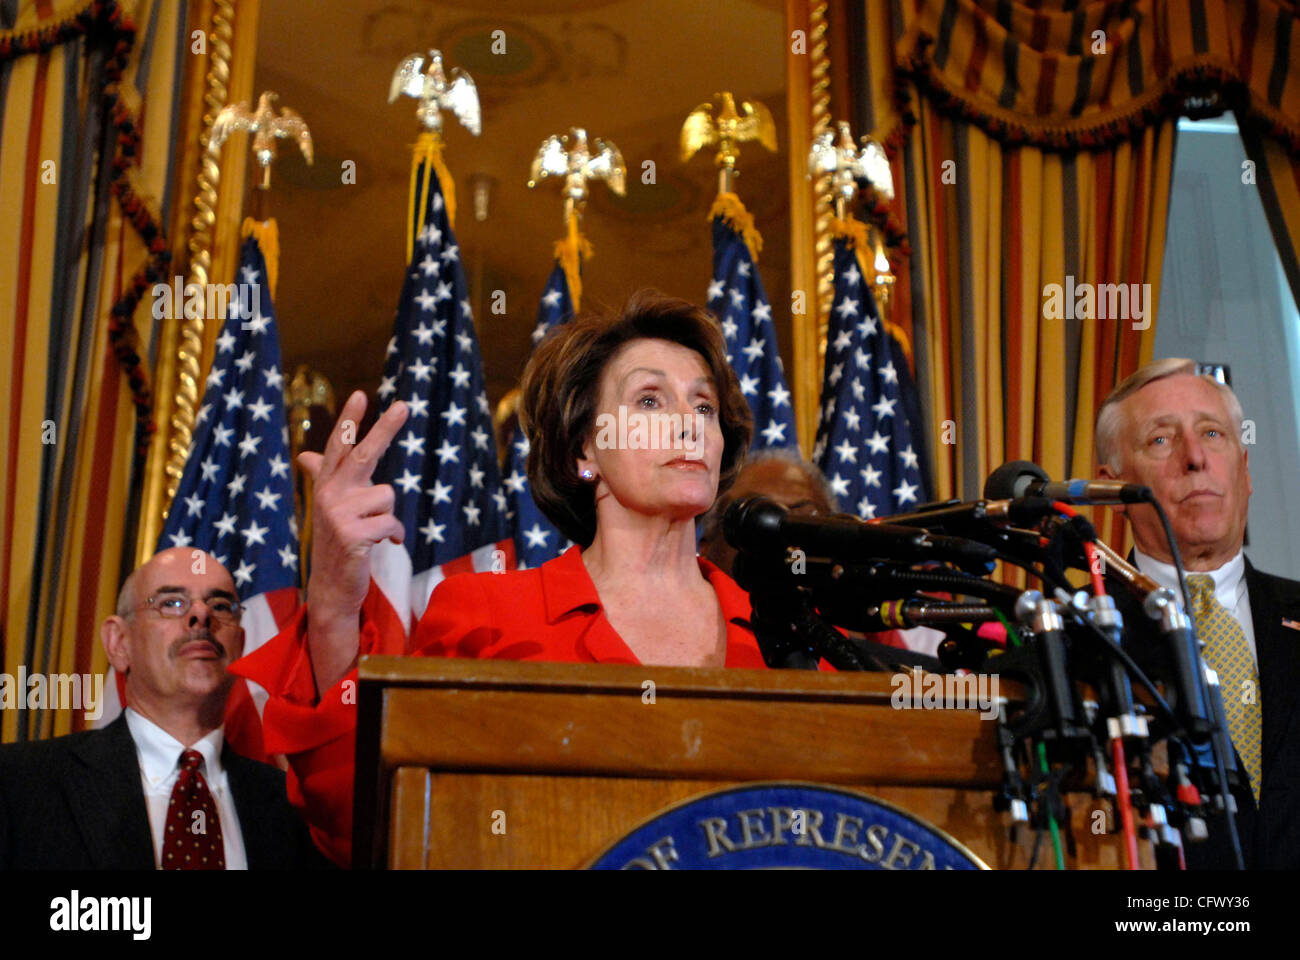 Mar 13, 2007 - Washington, DC, USA - Speaker of the House NANCY PELOSI (D-CA) speaks with reporters about new and upcoming 'accountability legislation,' which House Democrats tout as exercising Congress' check on the expansion of the Executive branch of government. Pelosi appeared with HENRY WAXMAN  Stock Photo